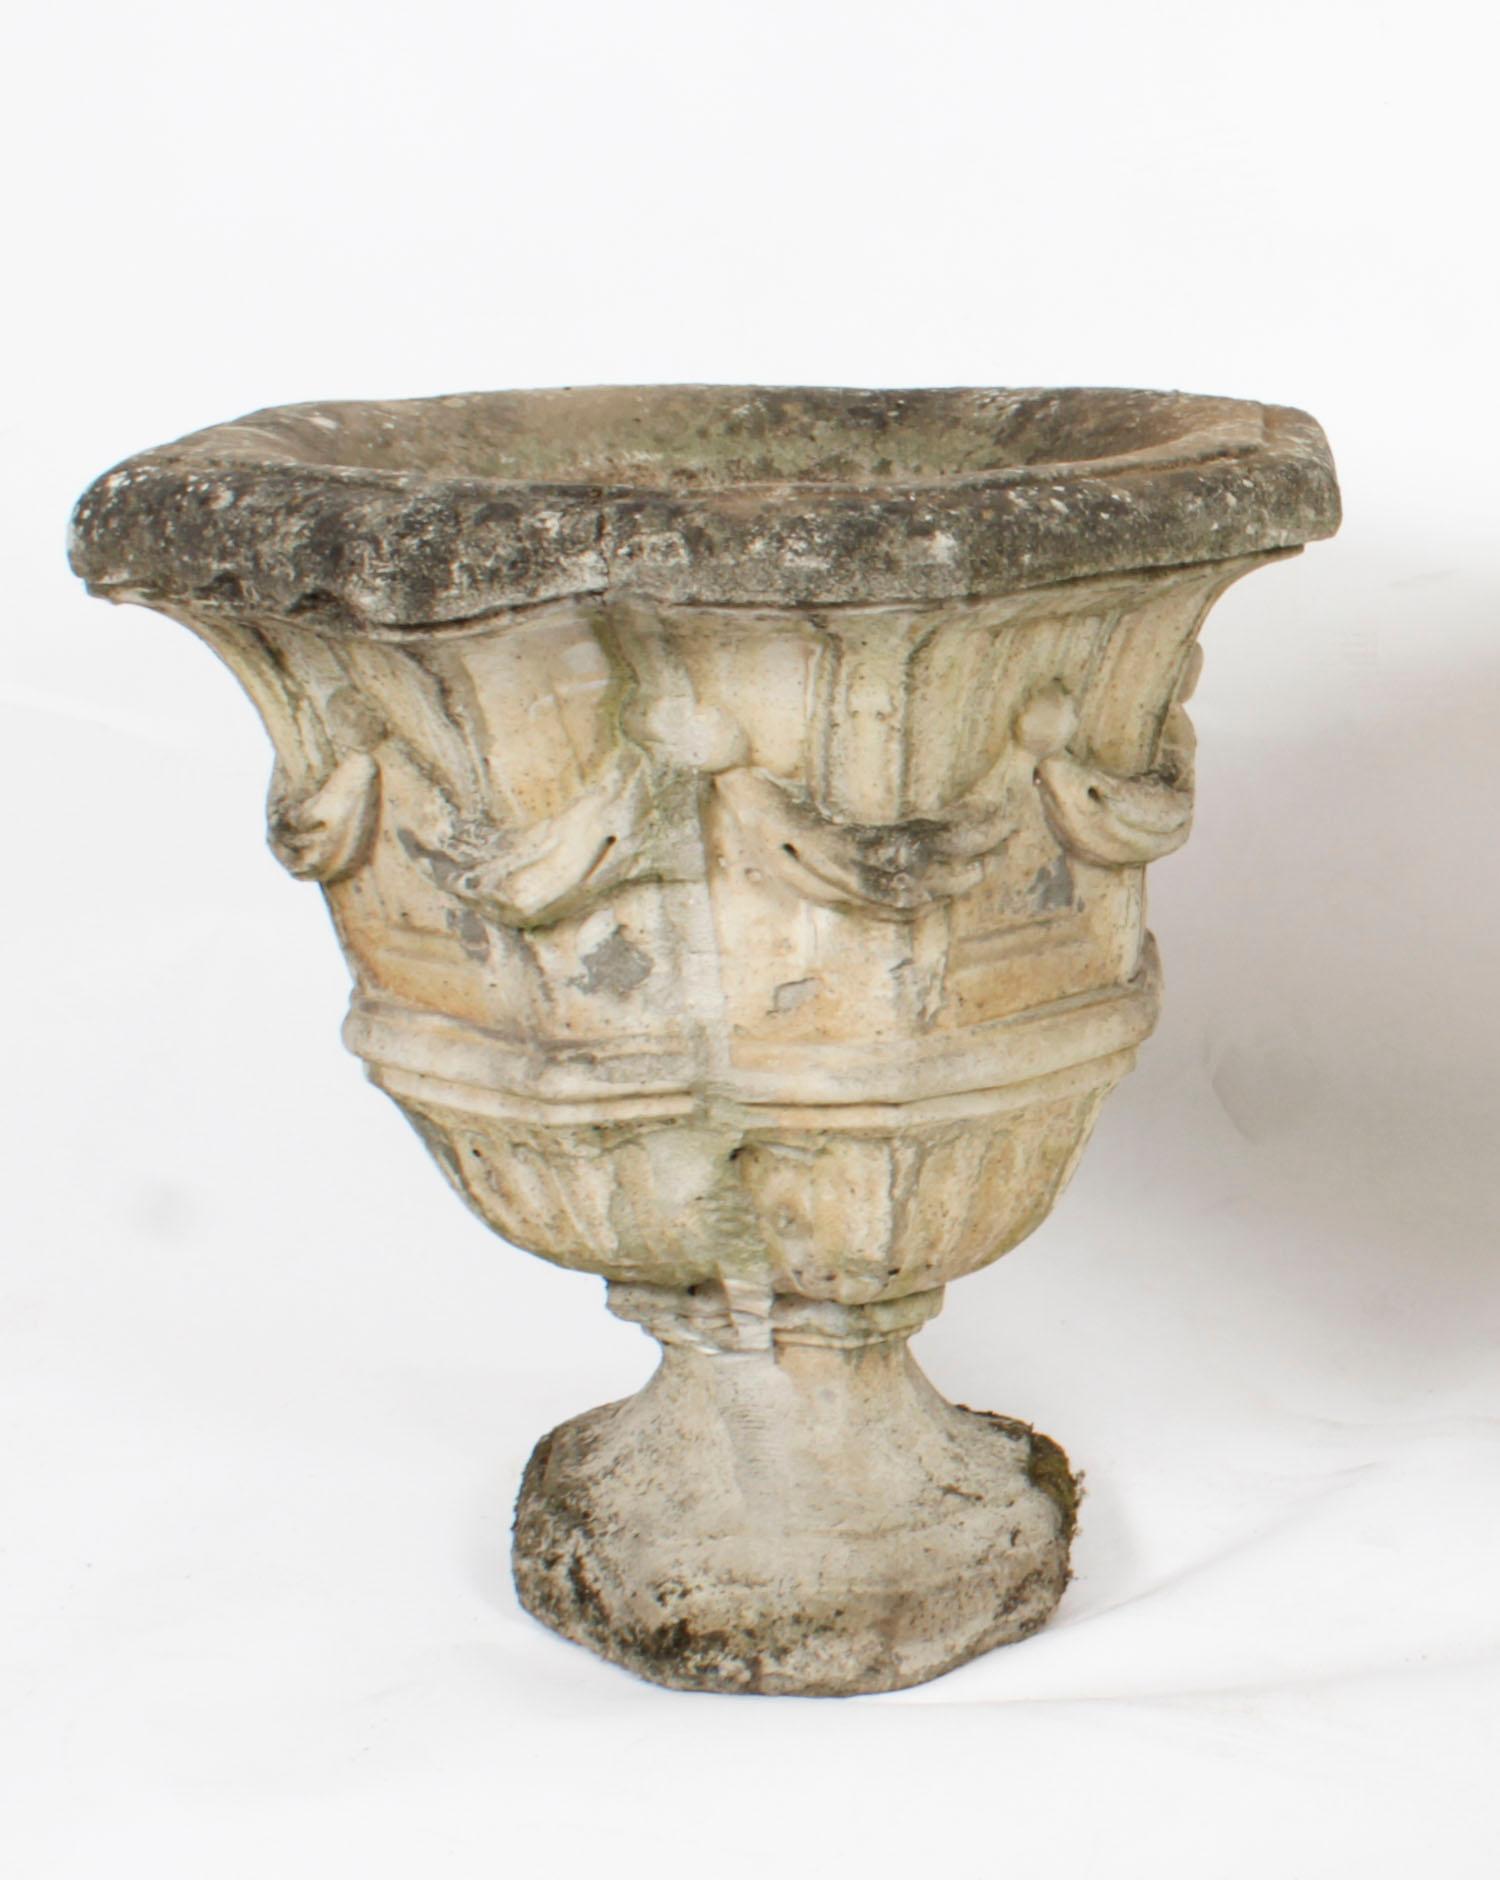 A decorative Vintage pair of reclaimed weathered composition garden urns dating from the mid 20th Century.

Condition:
In good condition. As vintage items, the pieces show signs of use commensurate with age, these minor condition issues are